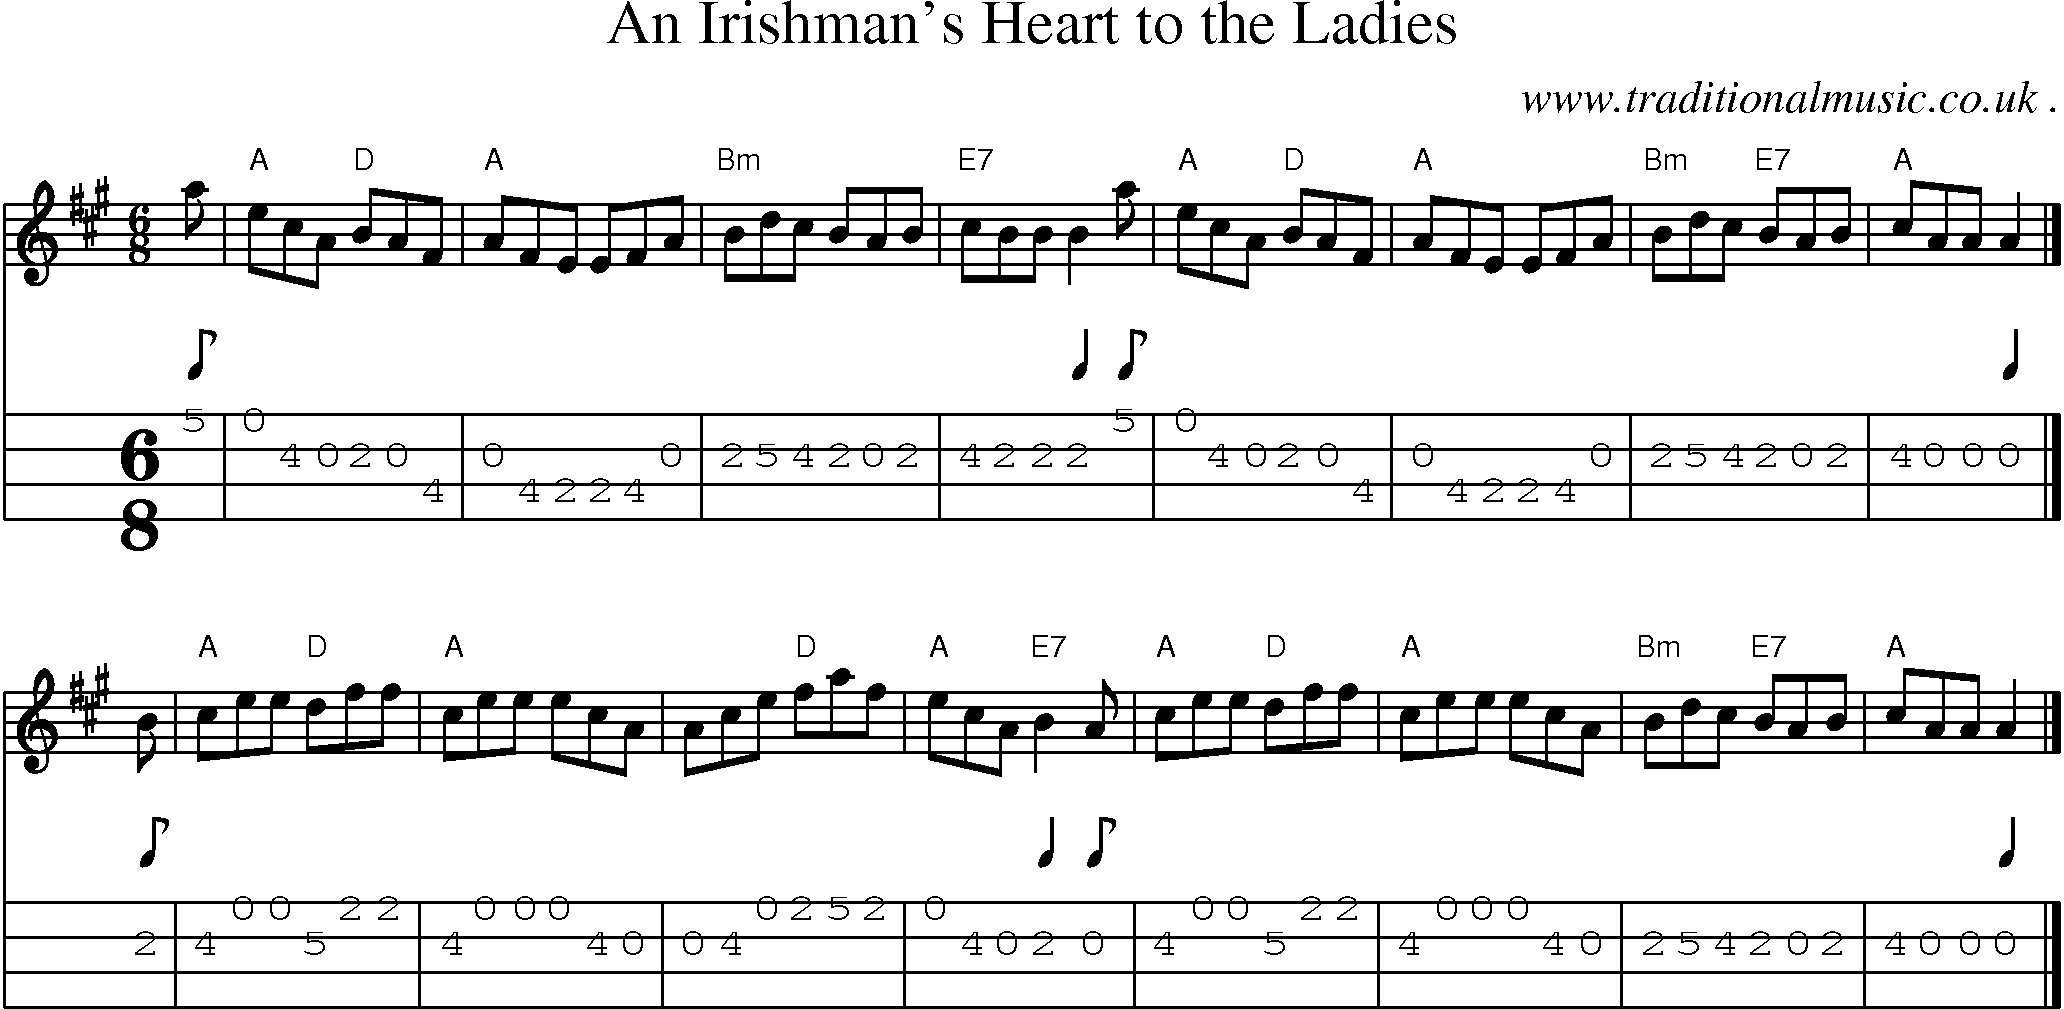 Sheet-music  score, Chords and Mandolin Tabs for An Irishmans Heart To The Ladies